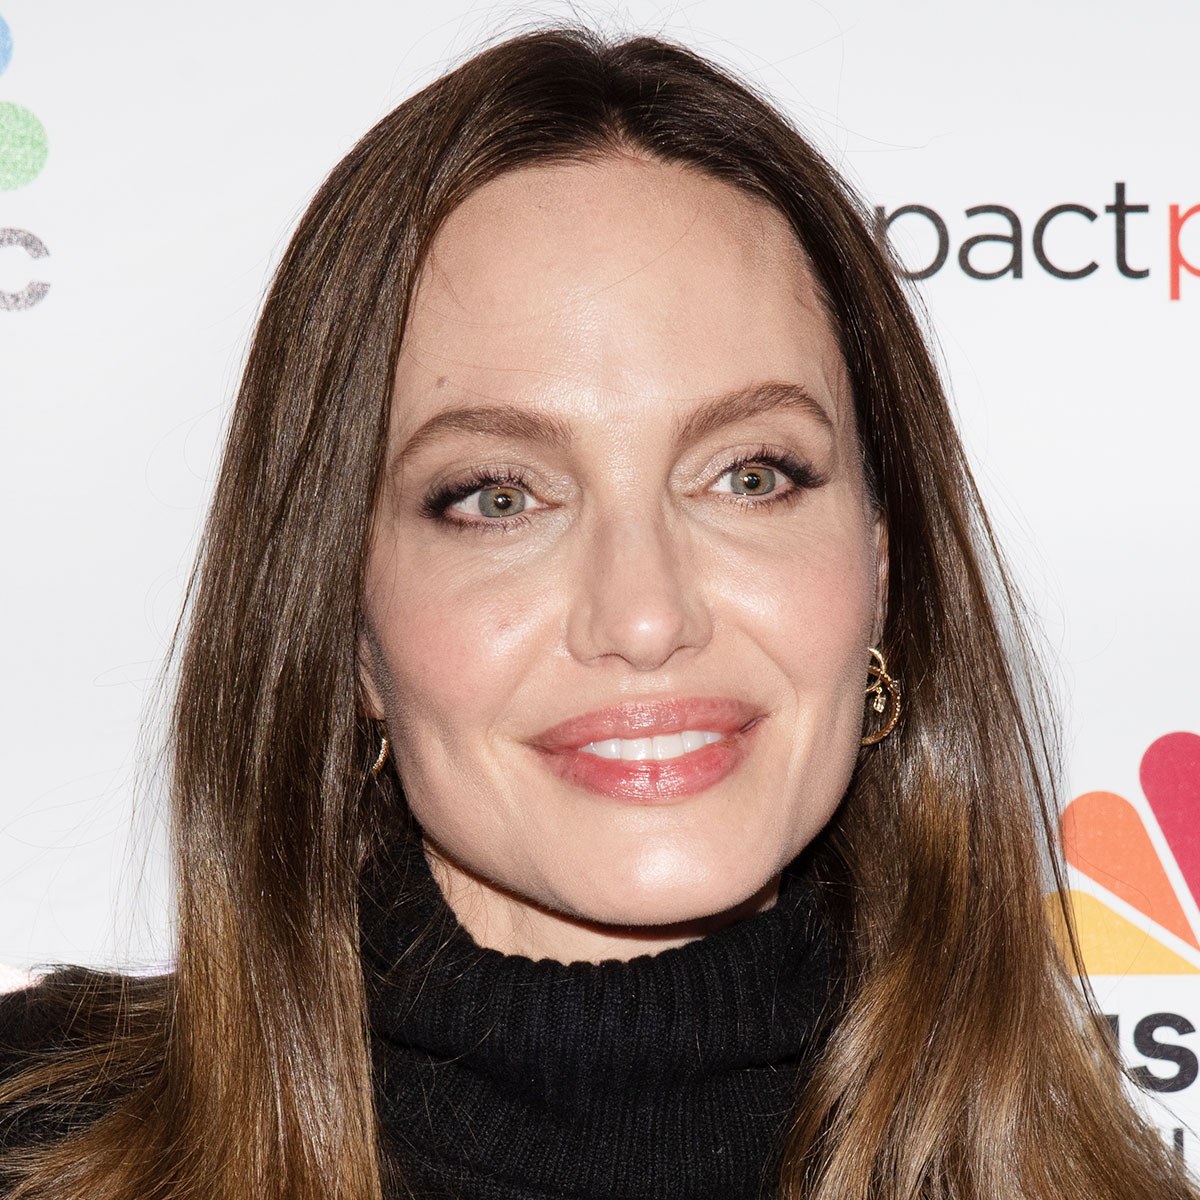 Angelina Jolie Stuns With Surprising New Ombré Hair And All-Black